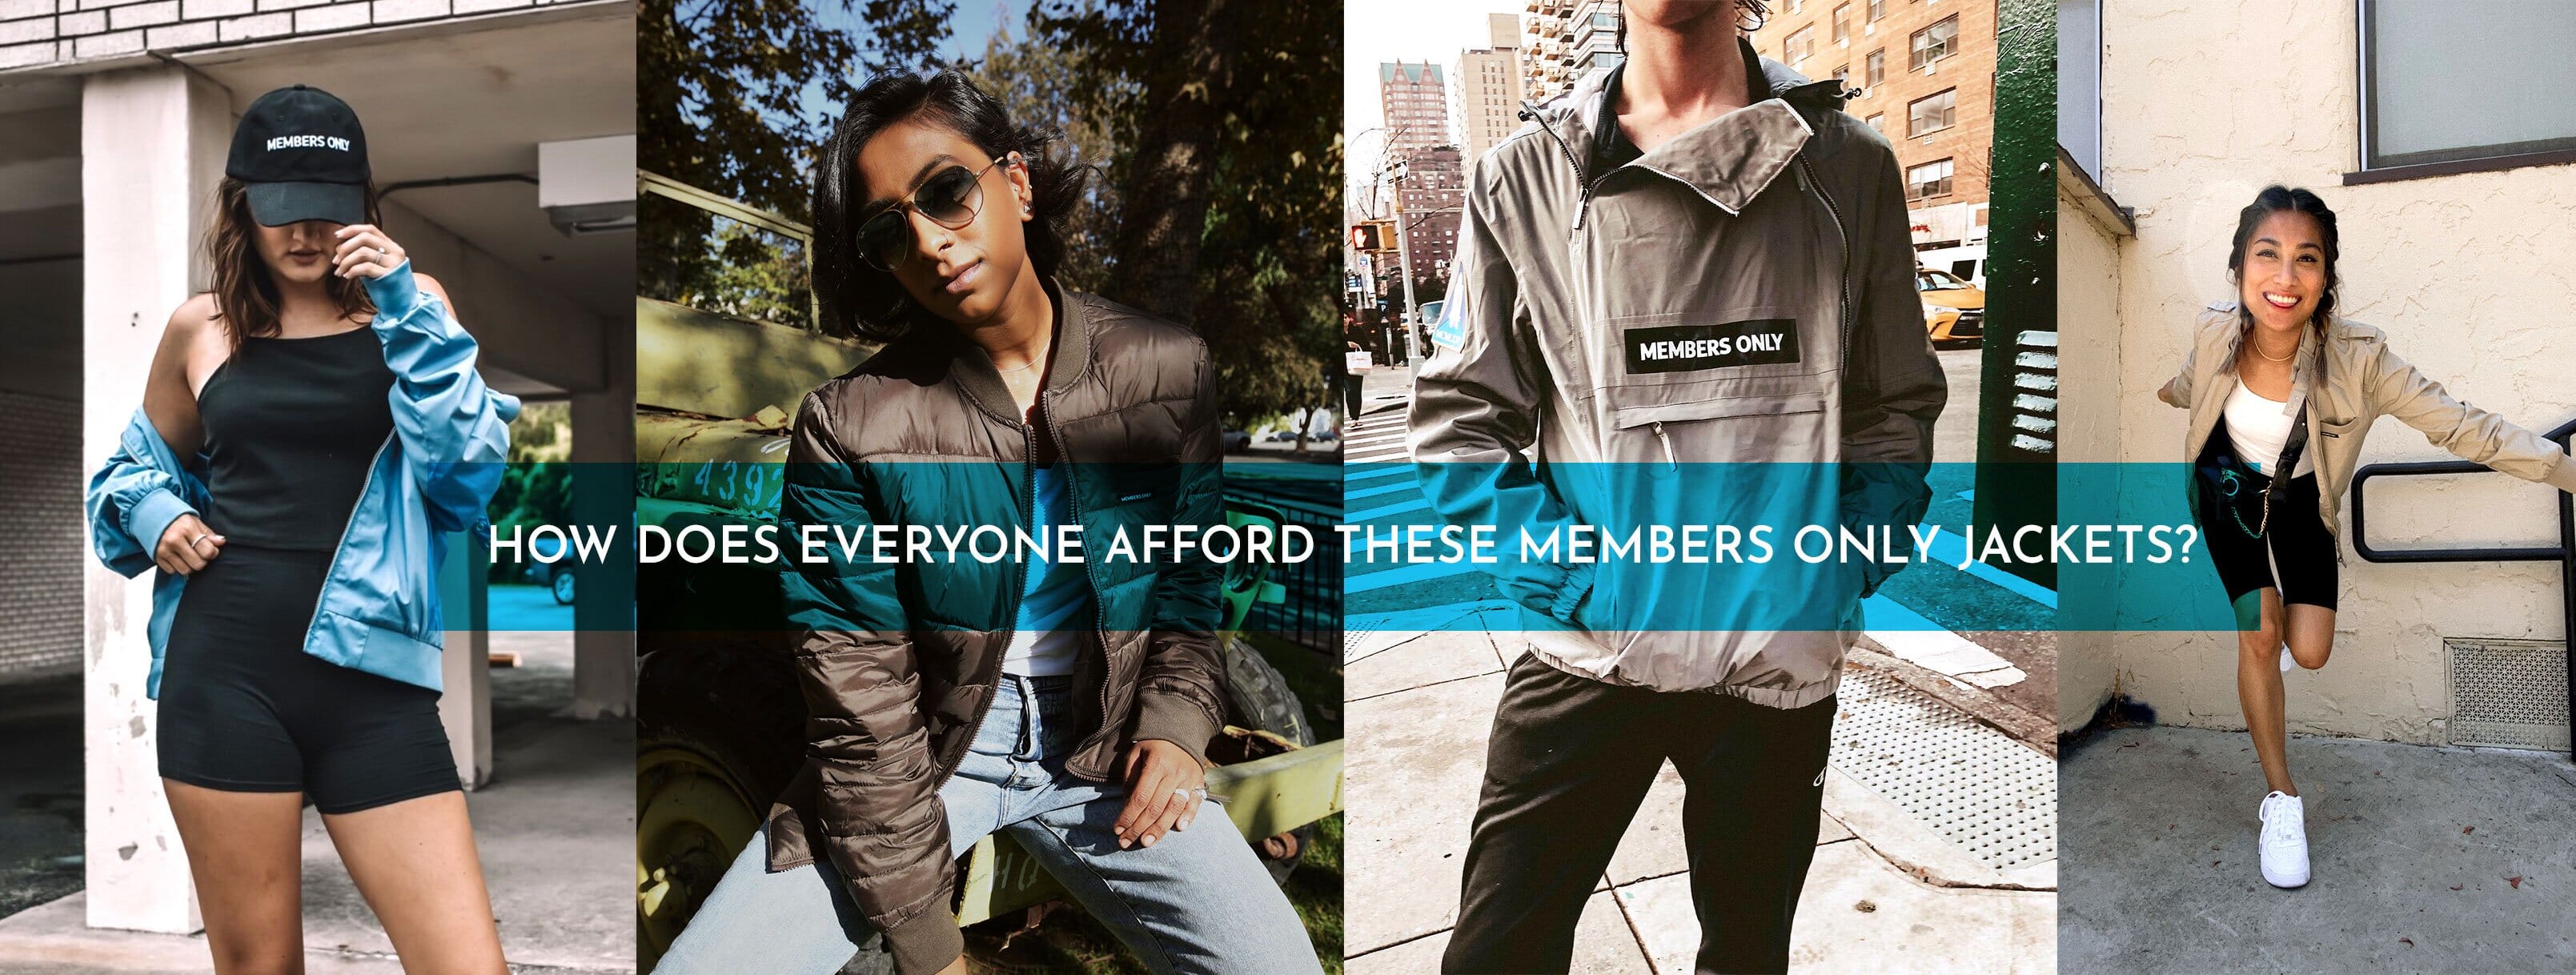 How Does Everyone Afford These Members Only Jackets?